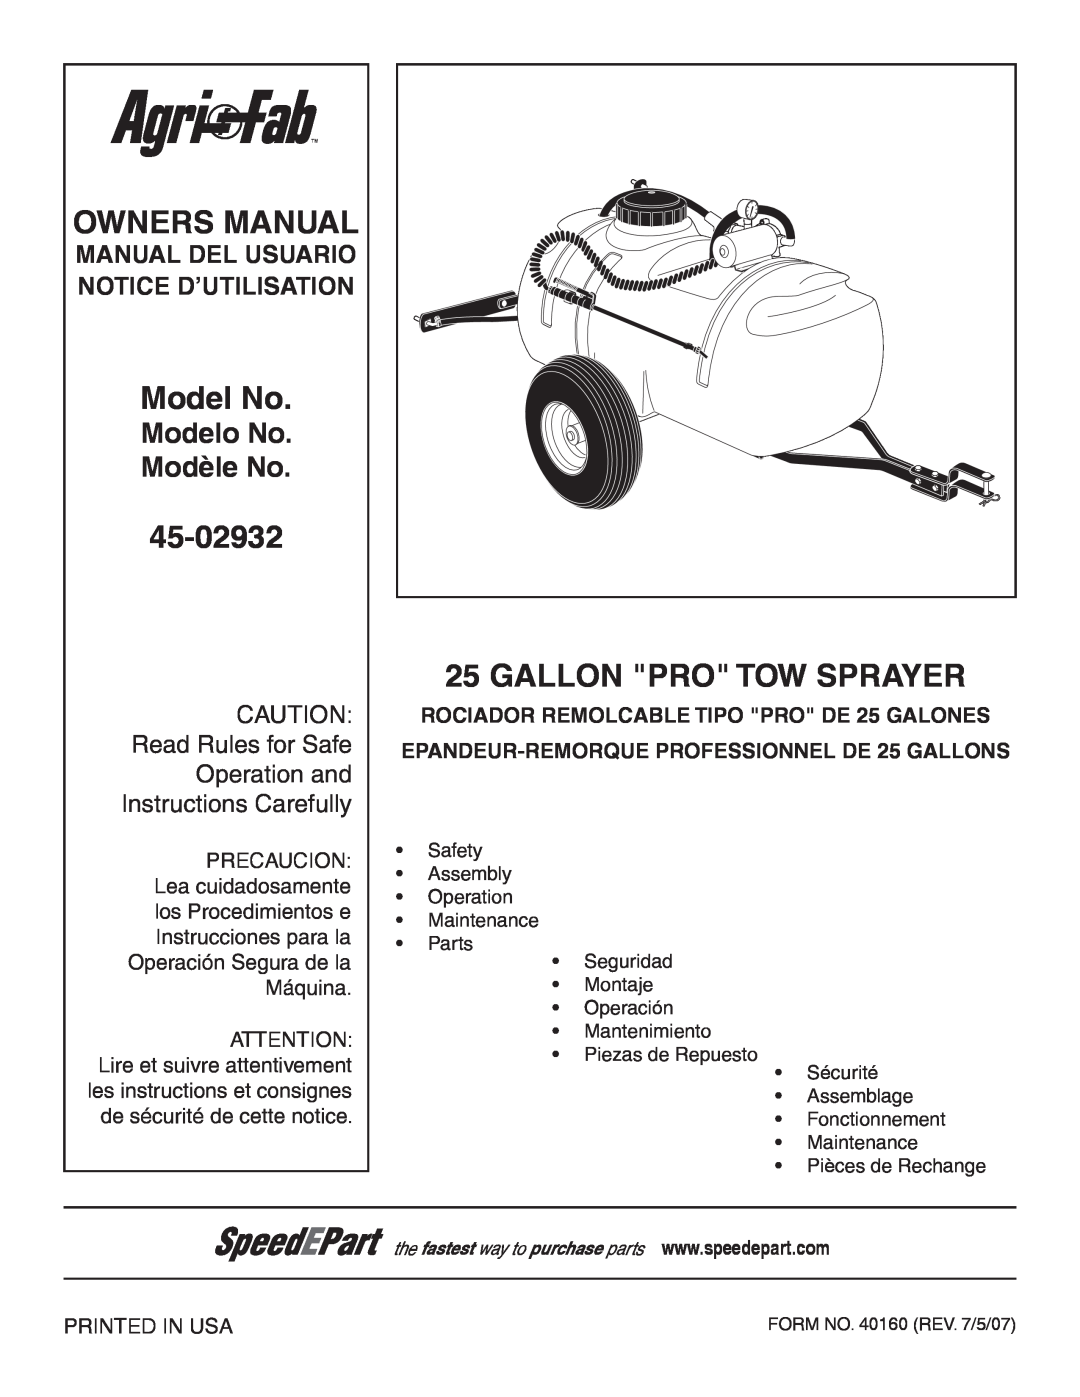 Agri-Fab 45-02932 owner manual Modelo No Modèle No, owners manual, Model No, Gallon Pro Tow Sprayer 